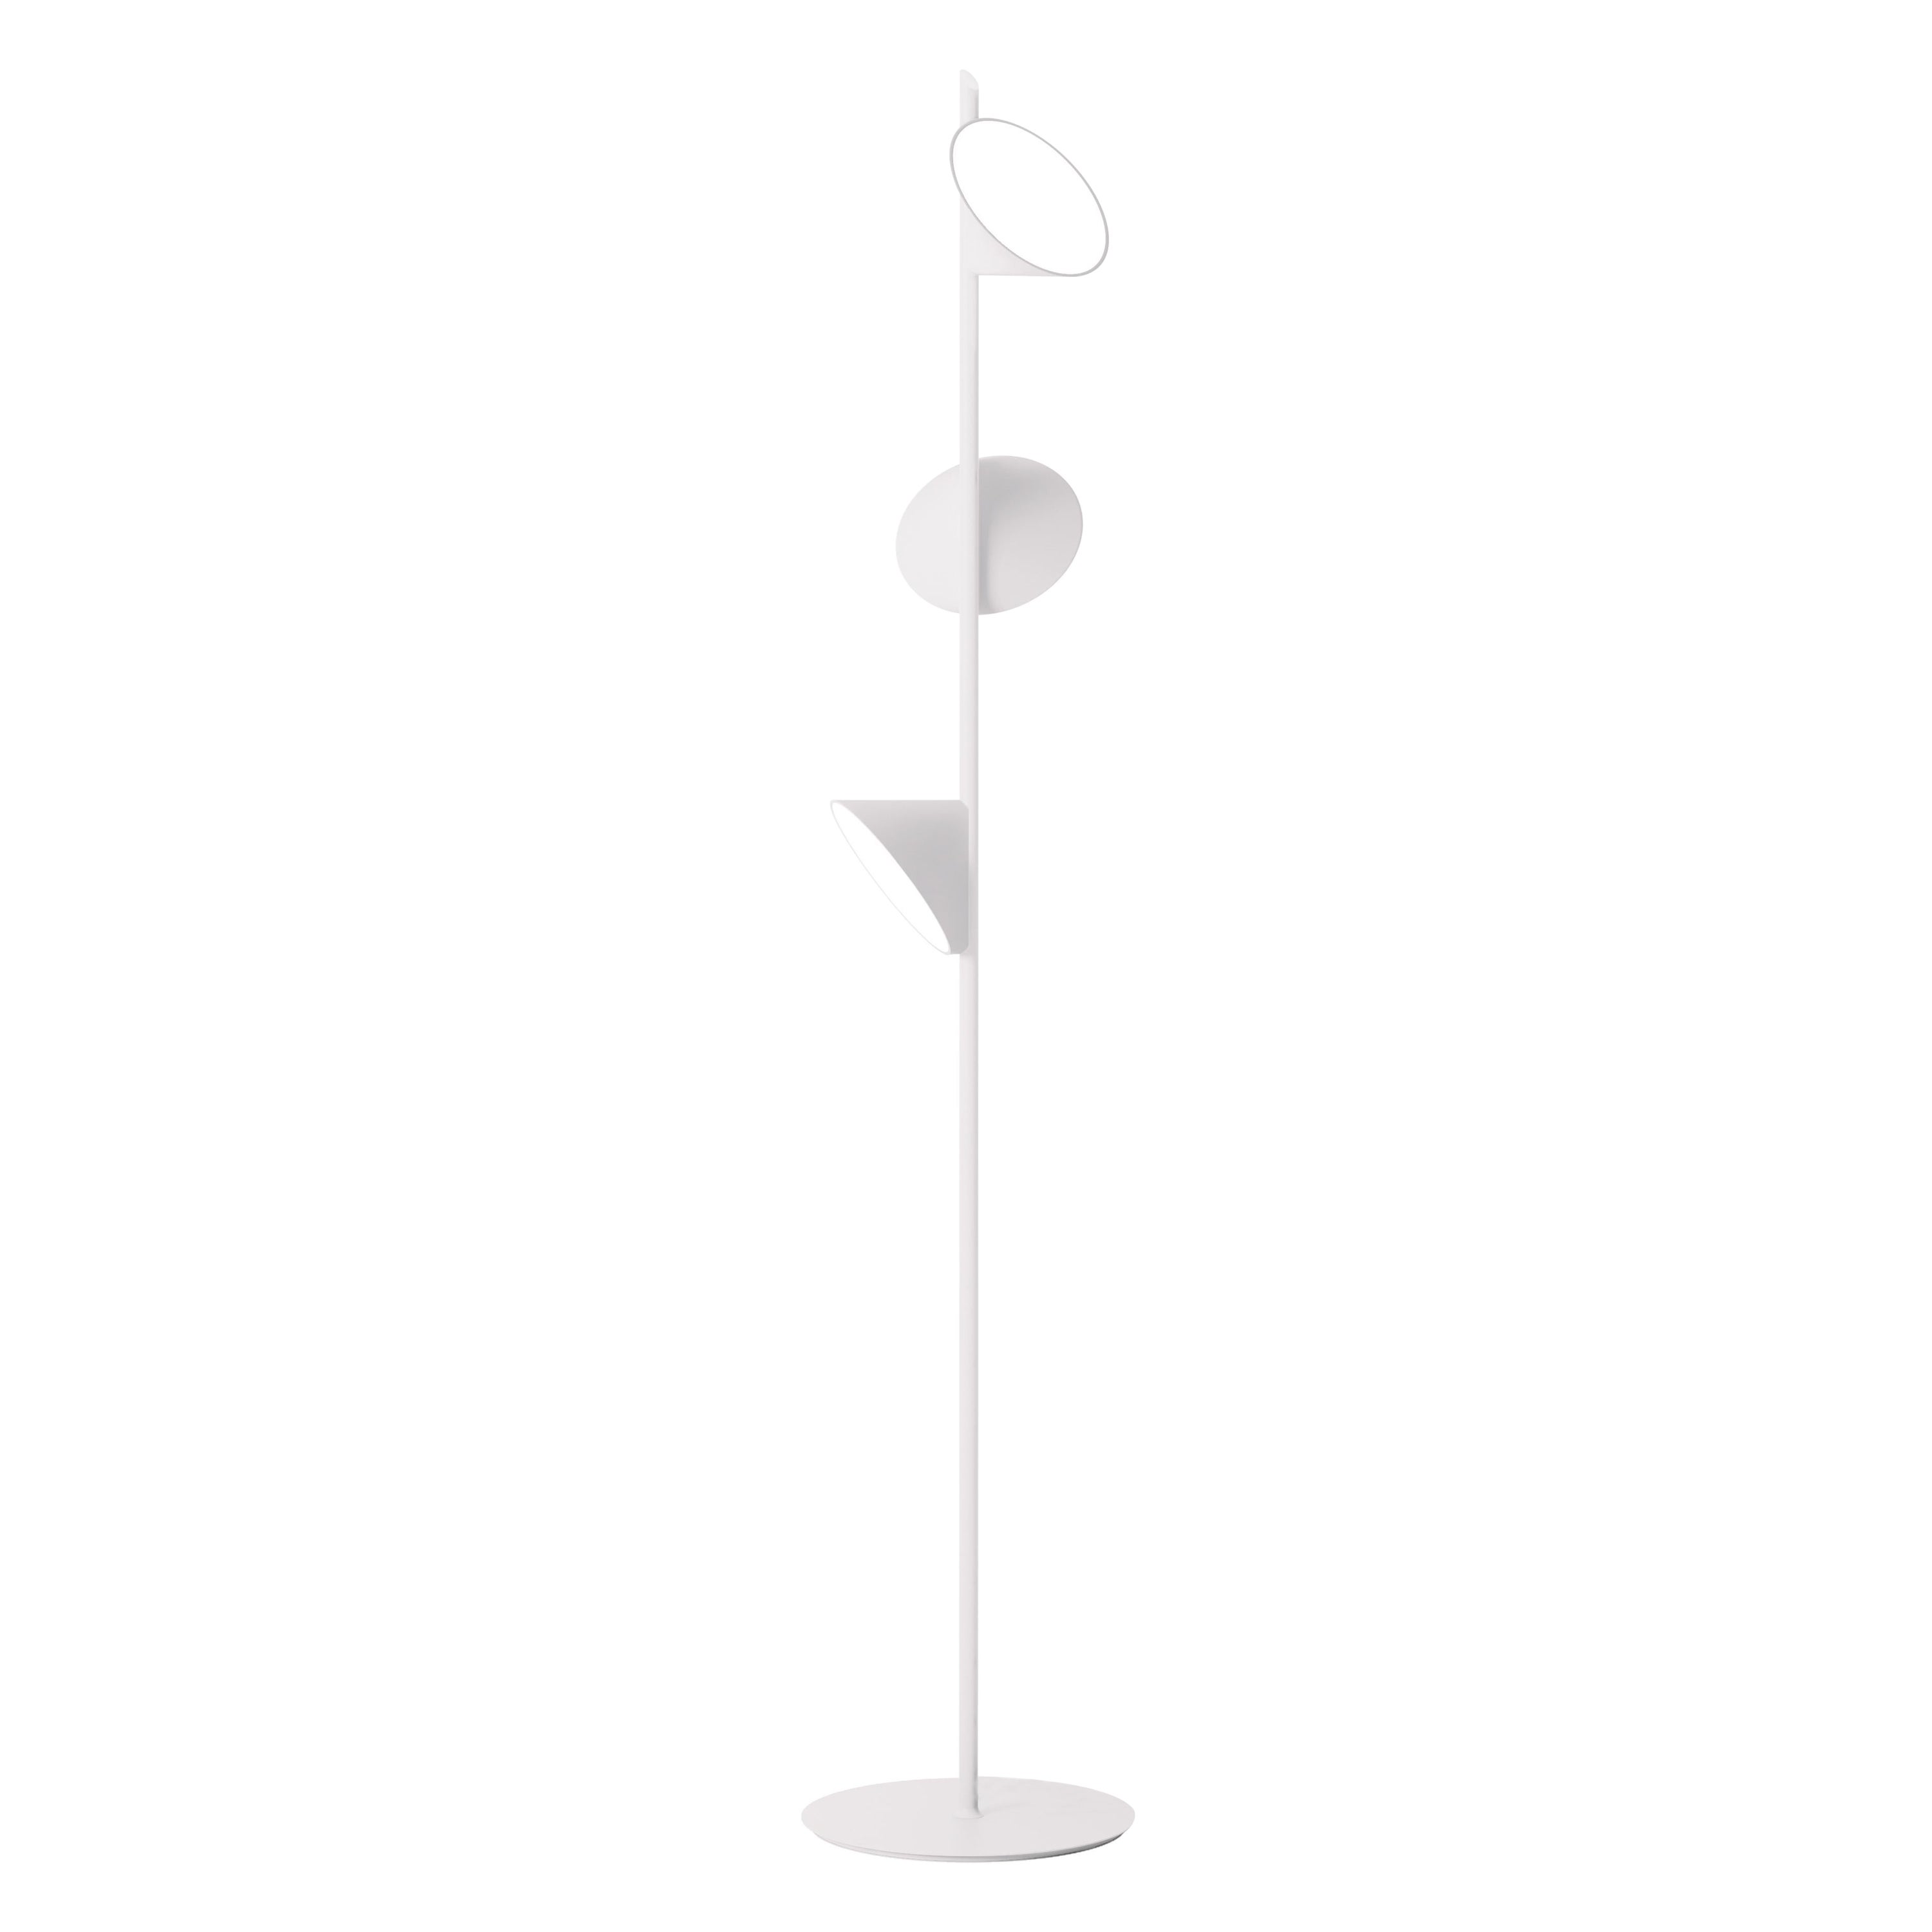 Axolight Orchid Floor Lamp with Aluminum Body in White by Rainer Mutsch For Sale